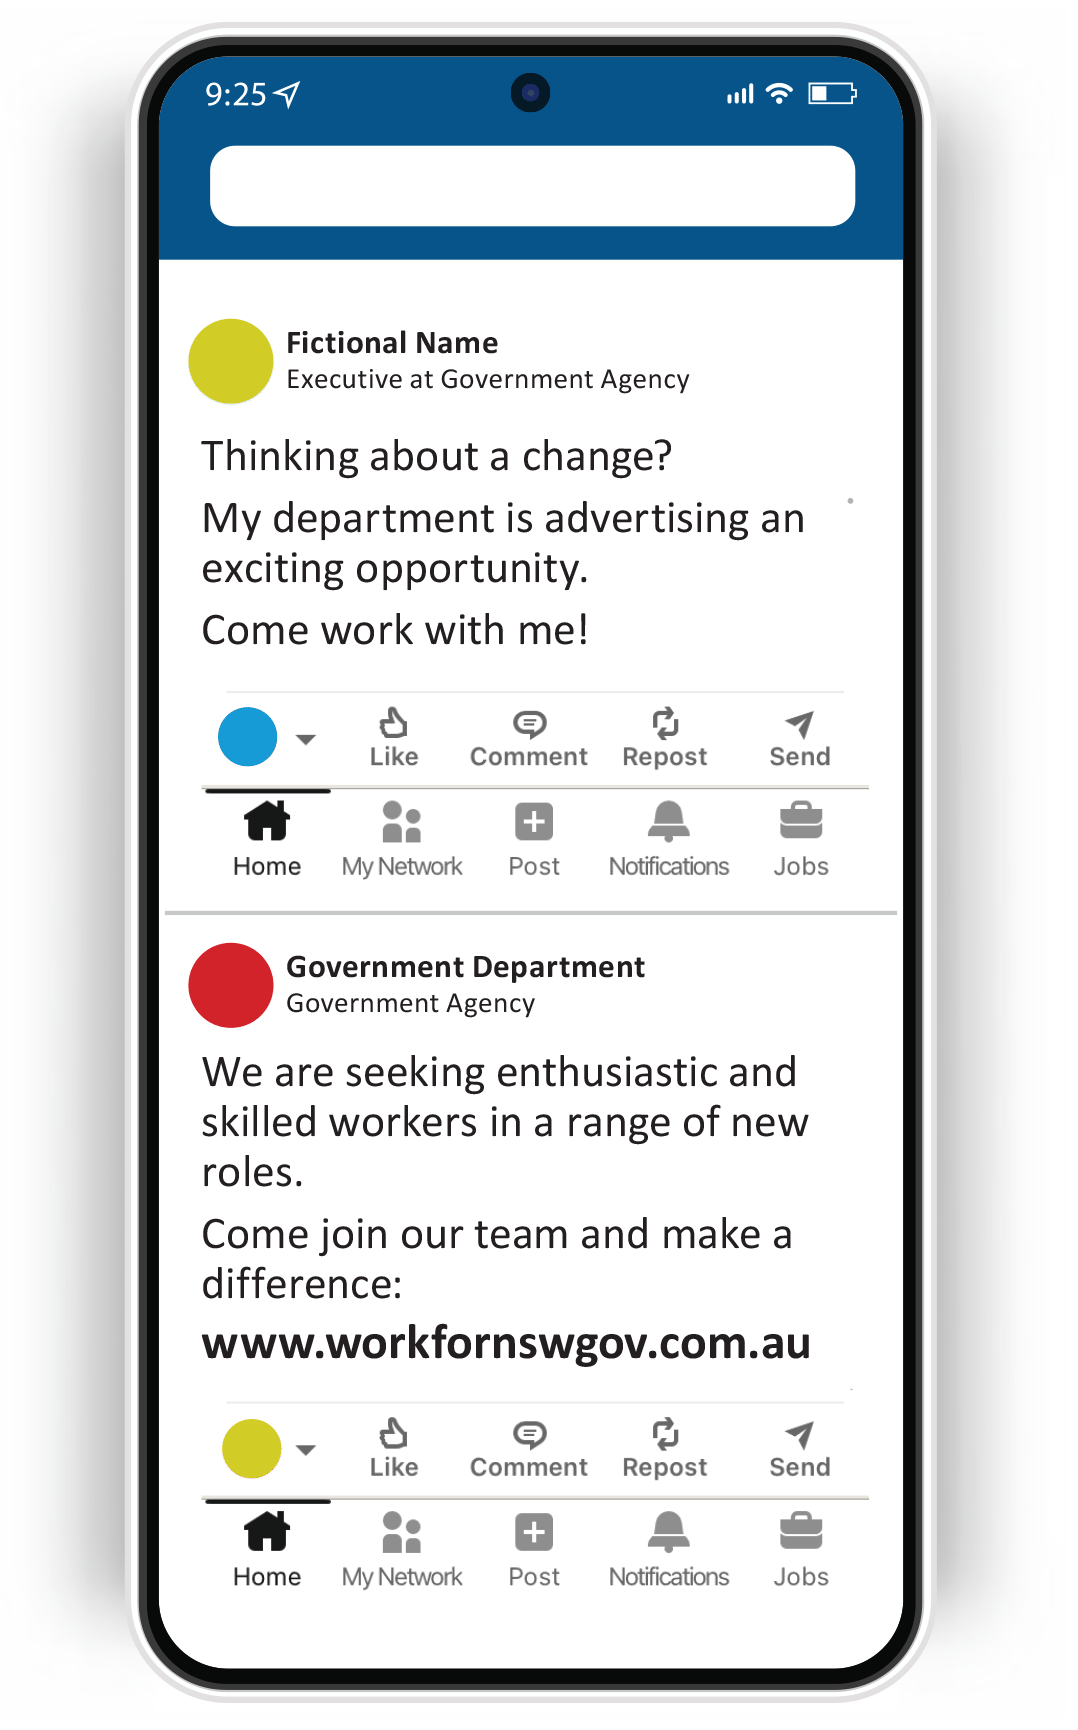 Iphone - Thinking about change? My department is advertising an excciting opportunity. Come work with me!